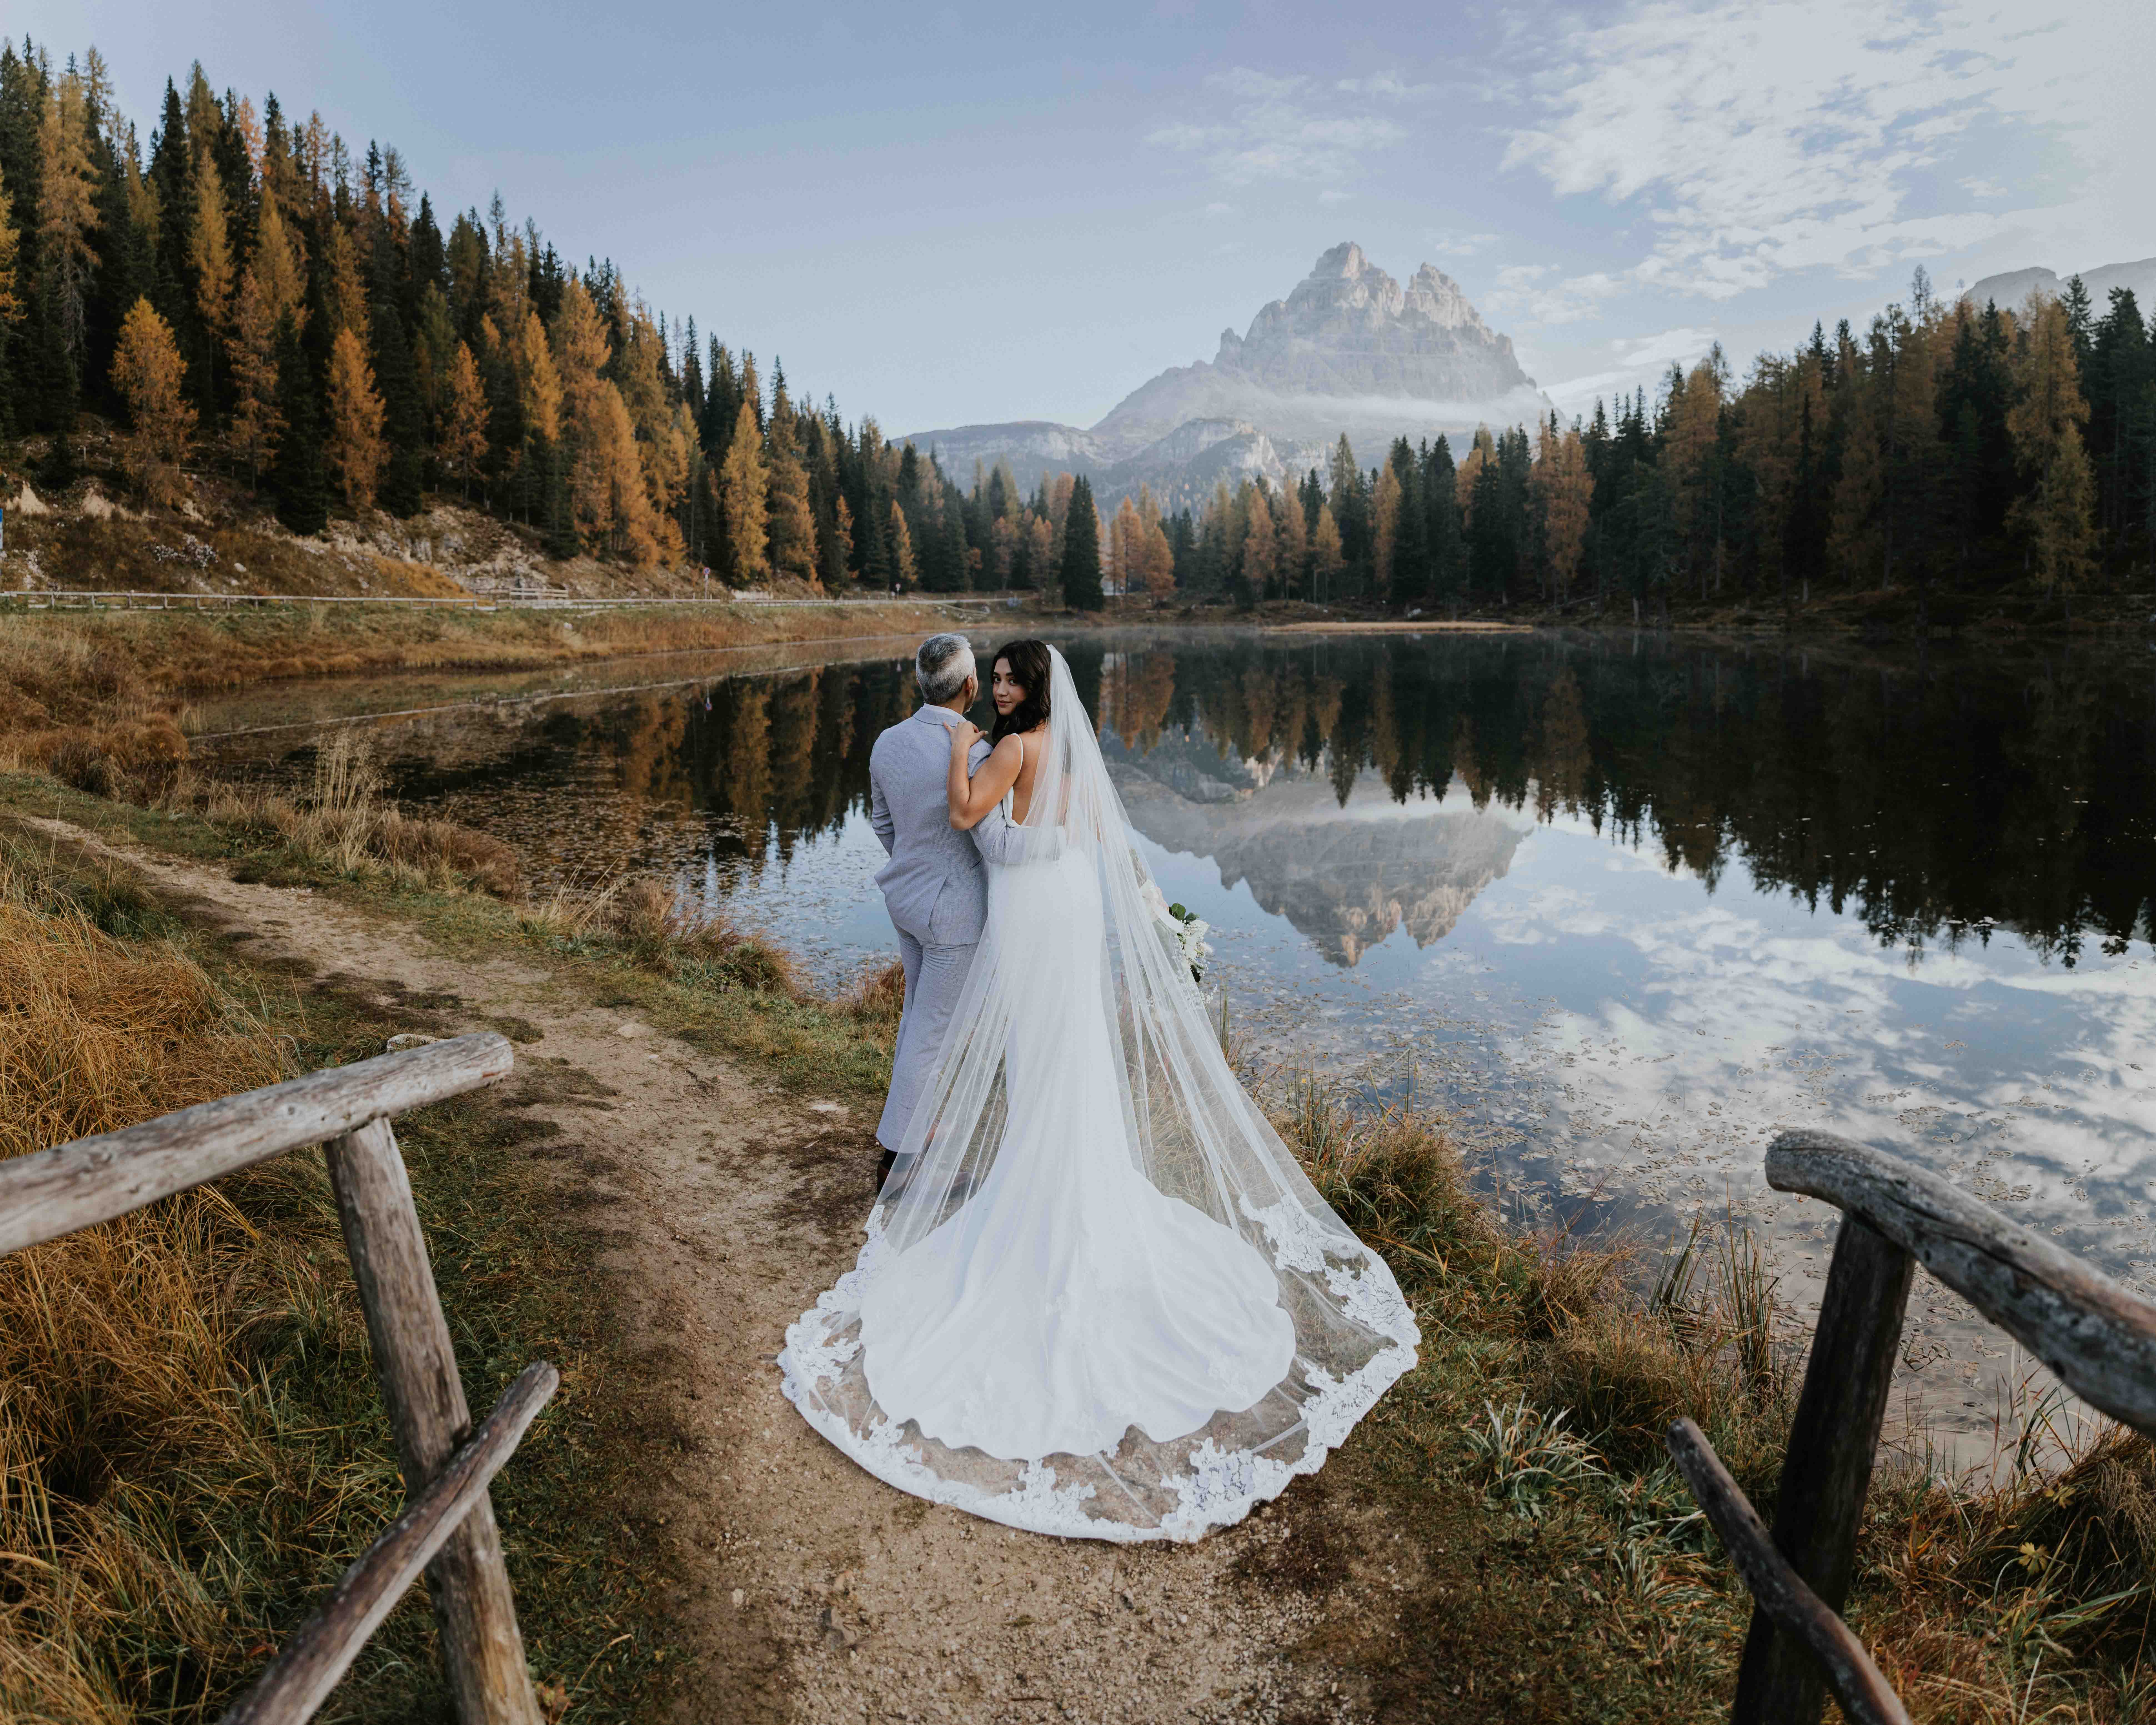 A wedding couple in white and light blue wedding attire stands near a still mountain lake during their elopement first look.